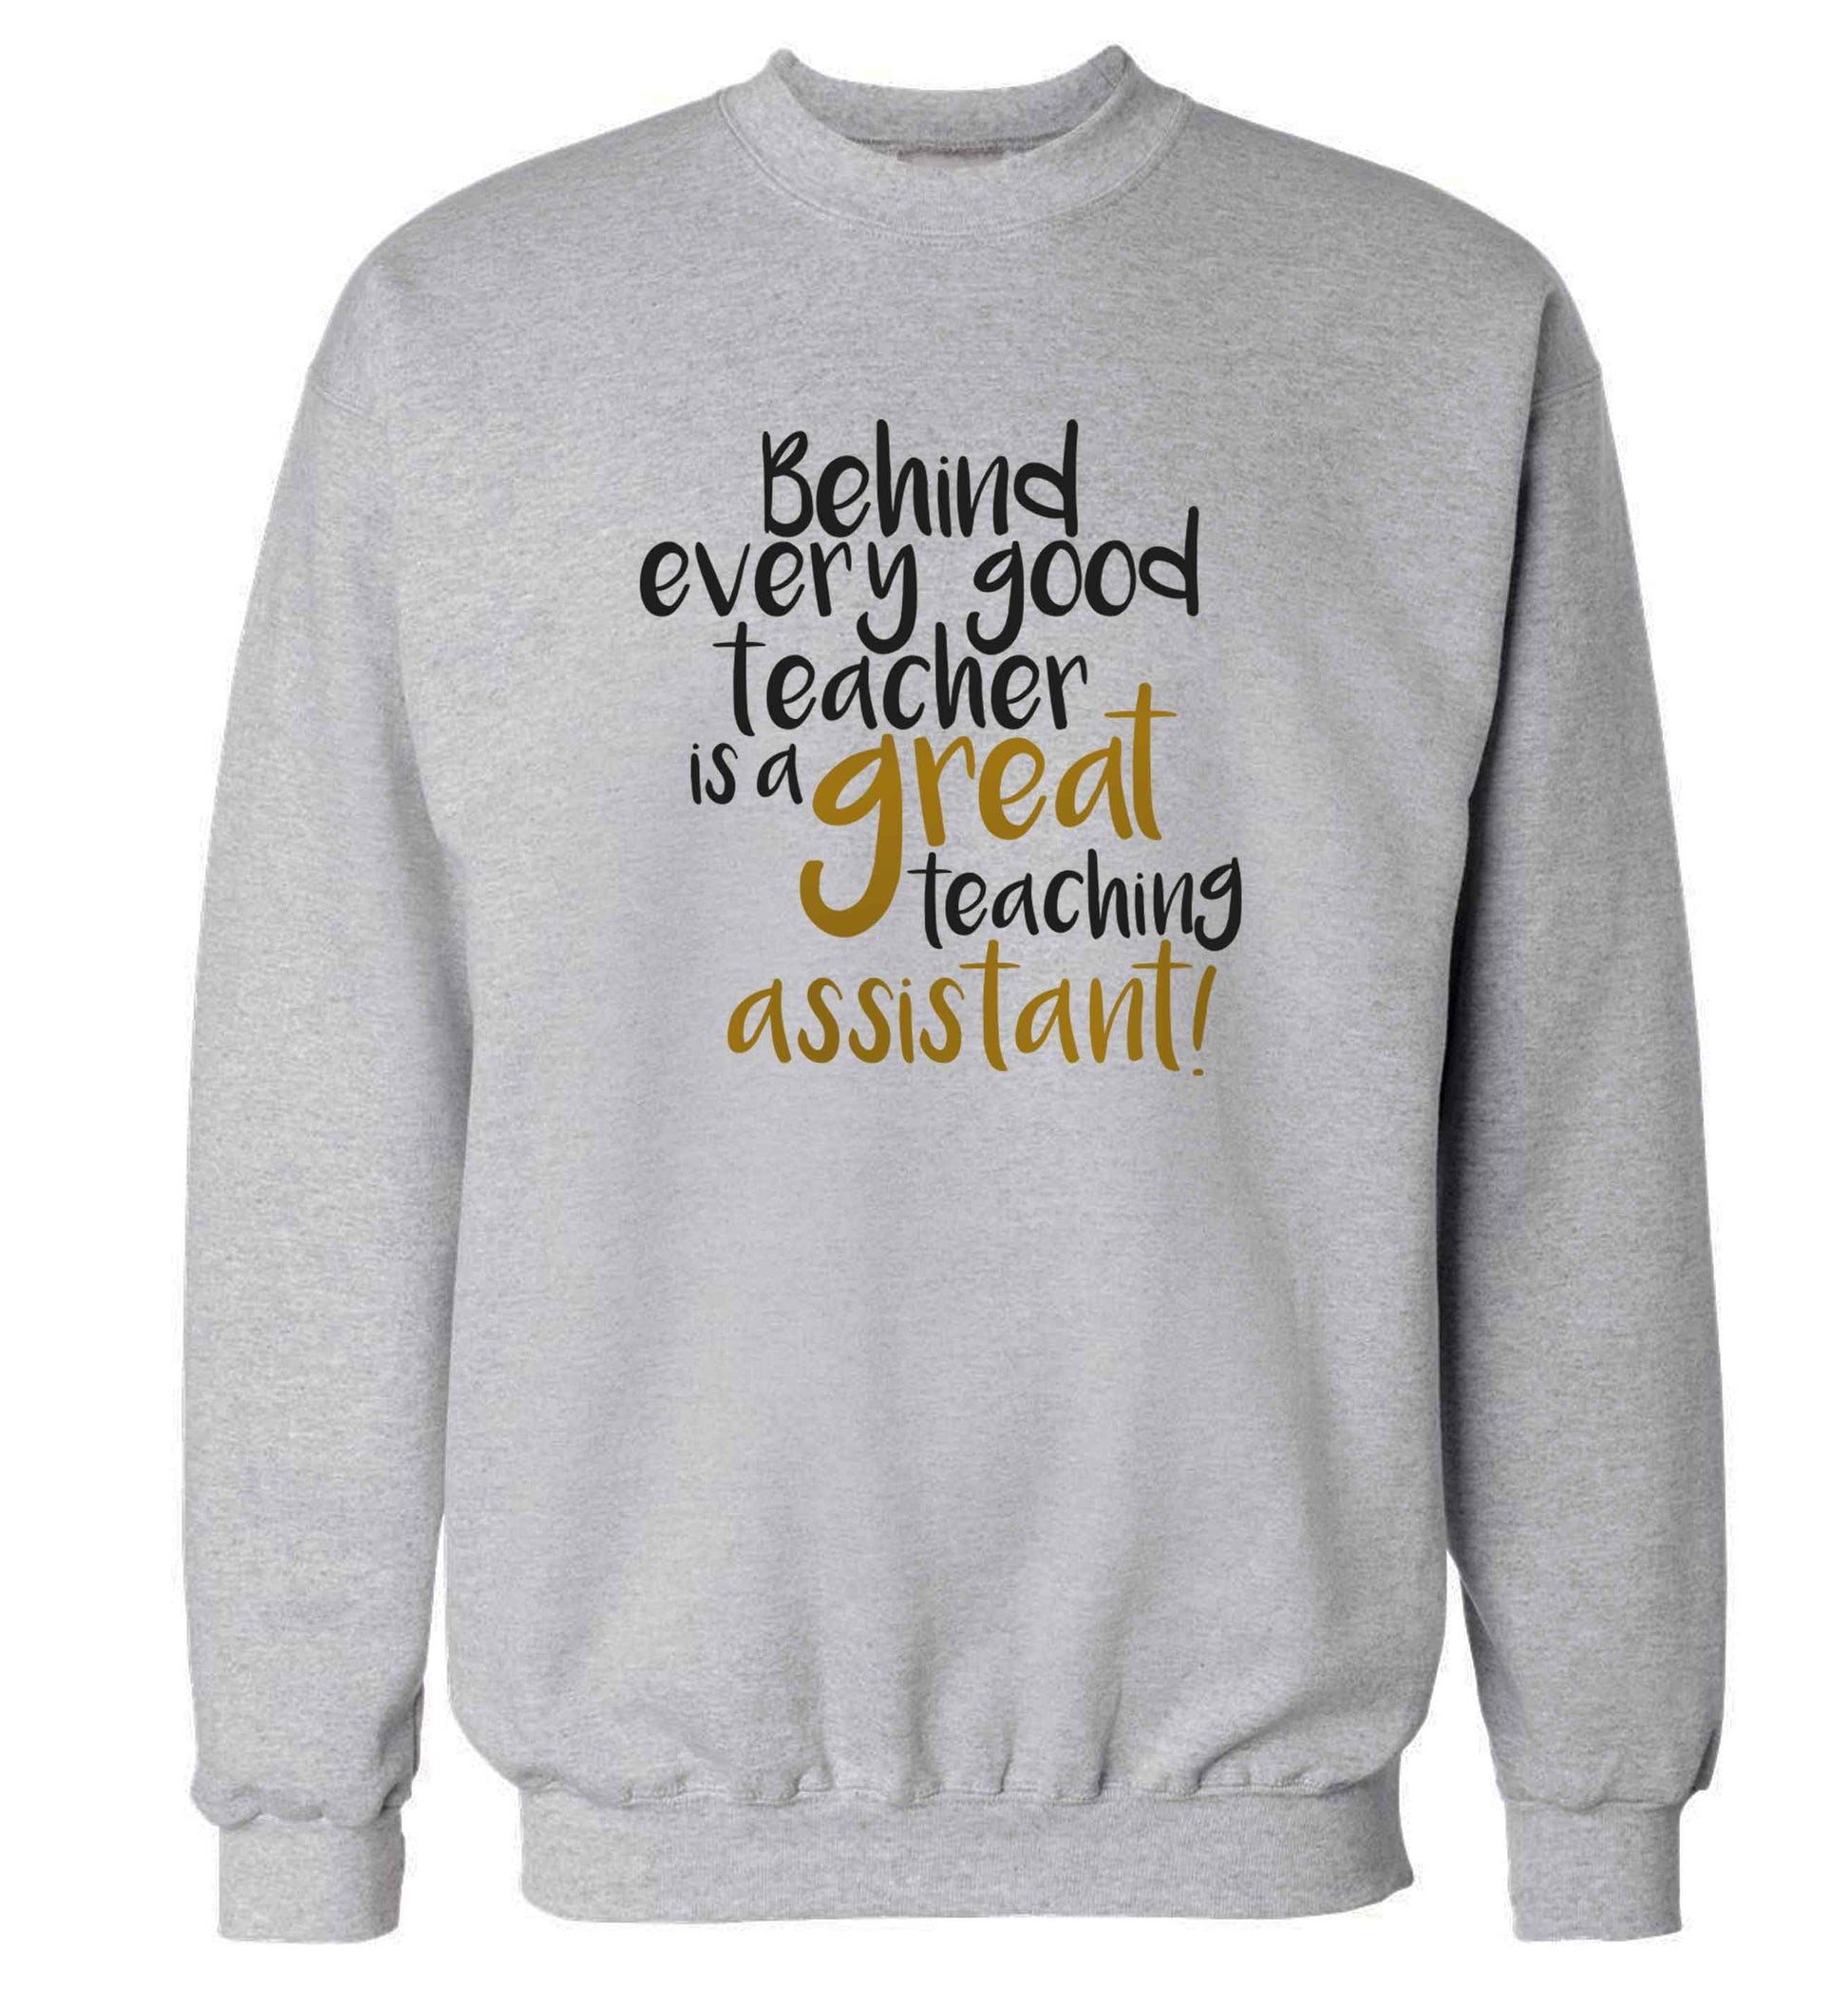 Behind every good teacher is a great teaching assistant adult's unisex grey sweater 2XL